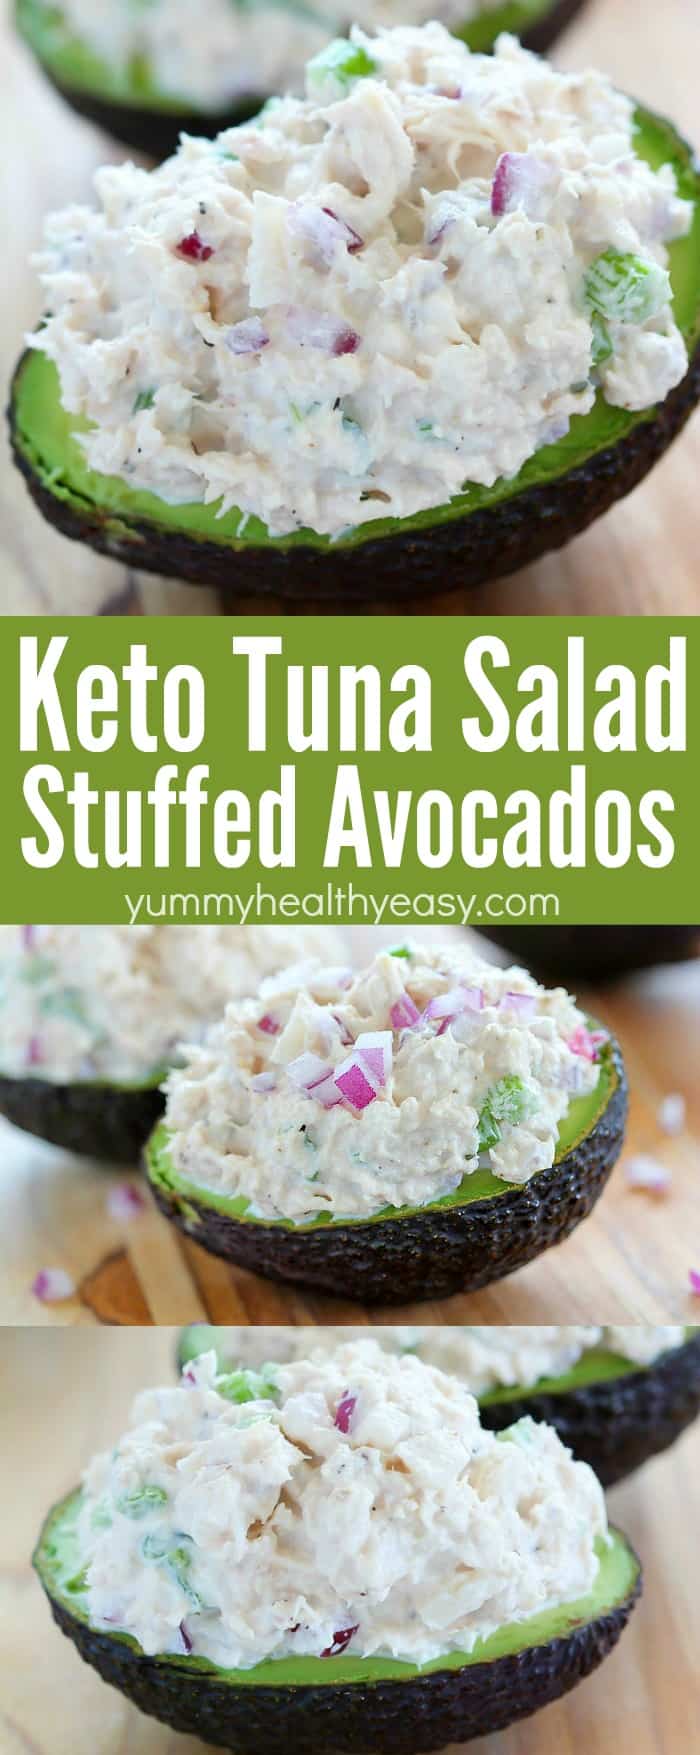 You have to try these Keto Tuna Salad Stuffed Avocados aka Tuna Salad Boats! They're a great low-carb lunch option, with a secret ingredient that gives it a little extra crunch you won't want to miss! #AD #avocado #tunasalad #easylunchrecipe #tunasaladrecipe #yummyhealthyeasy